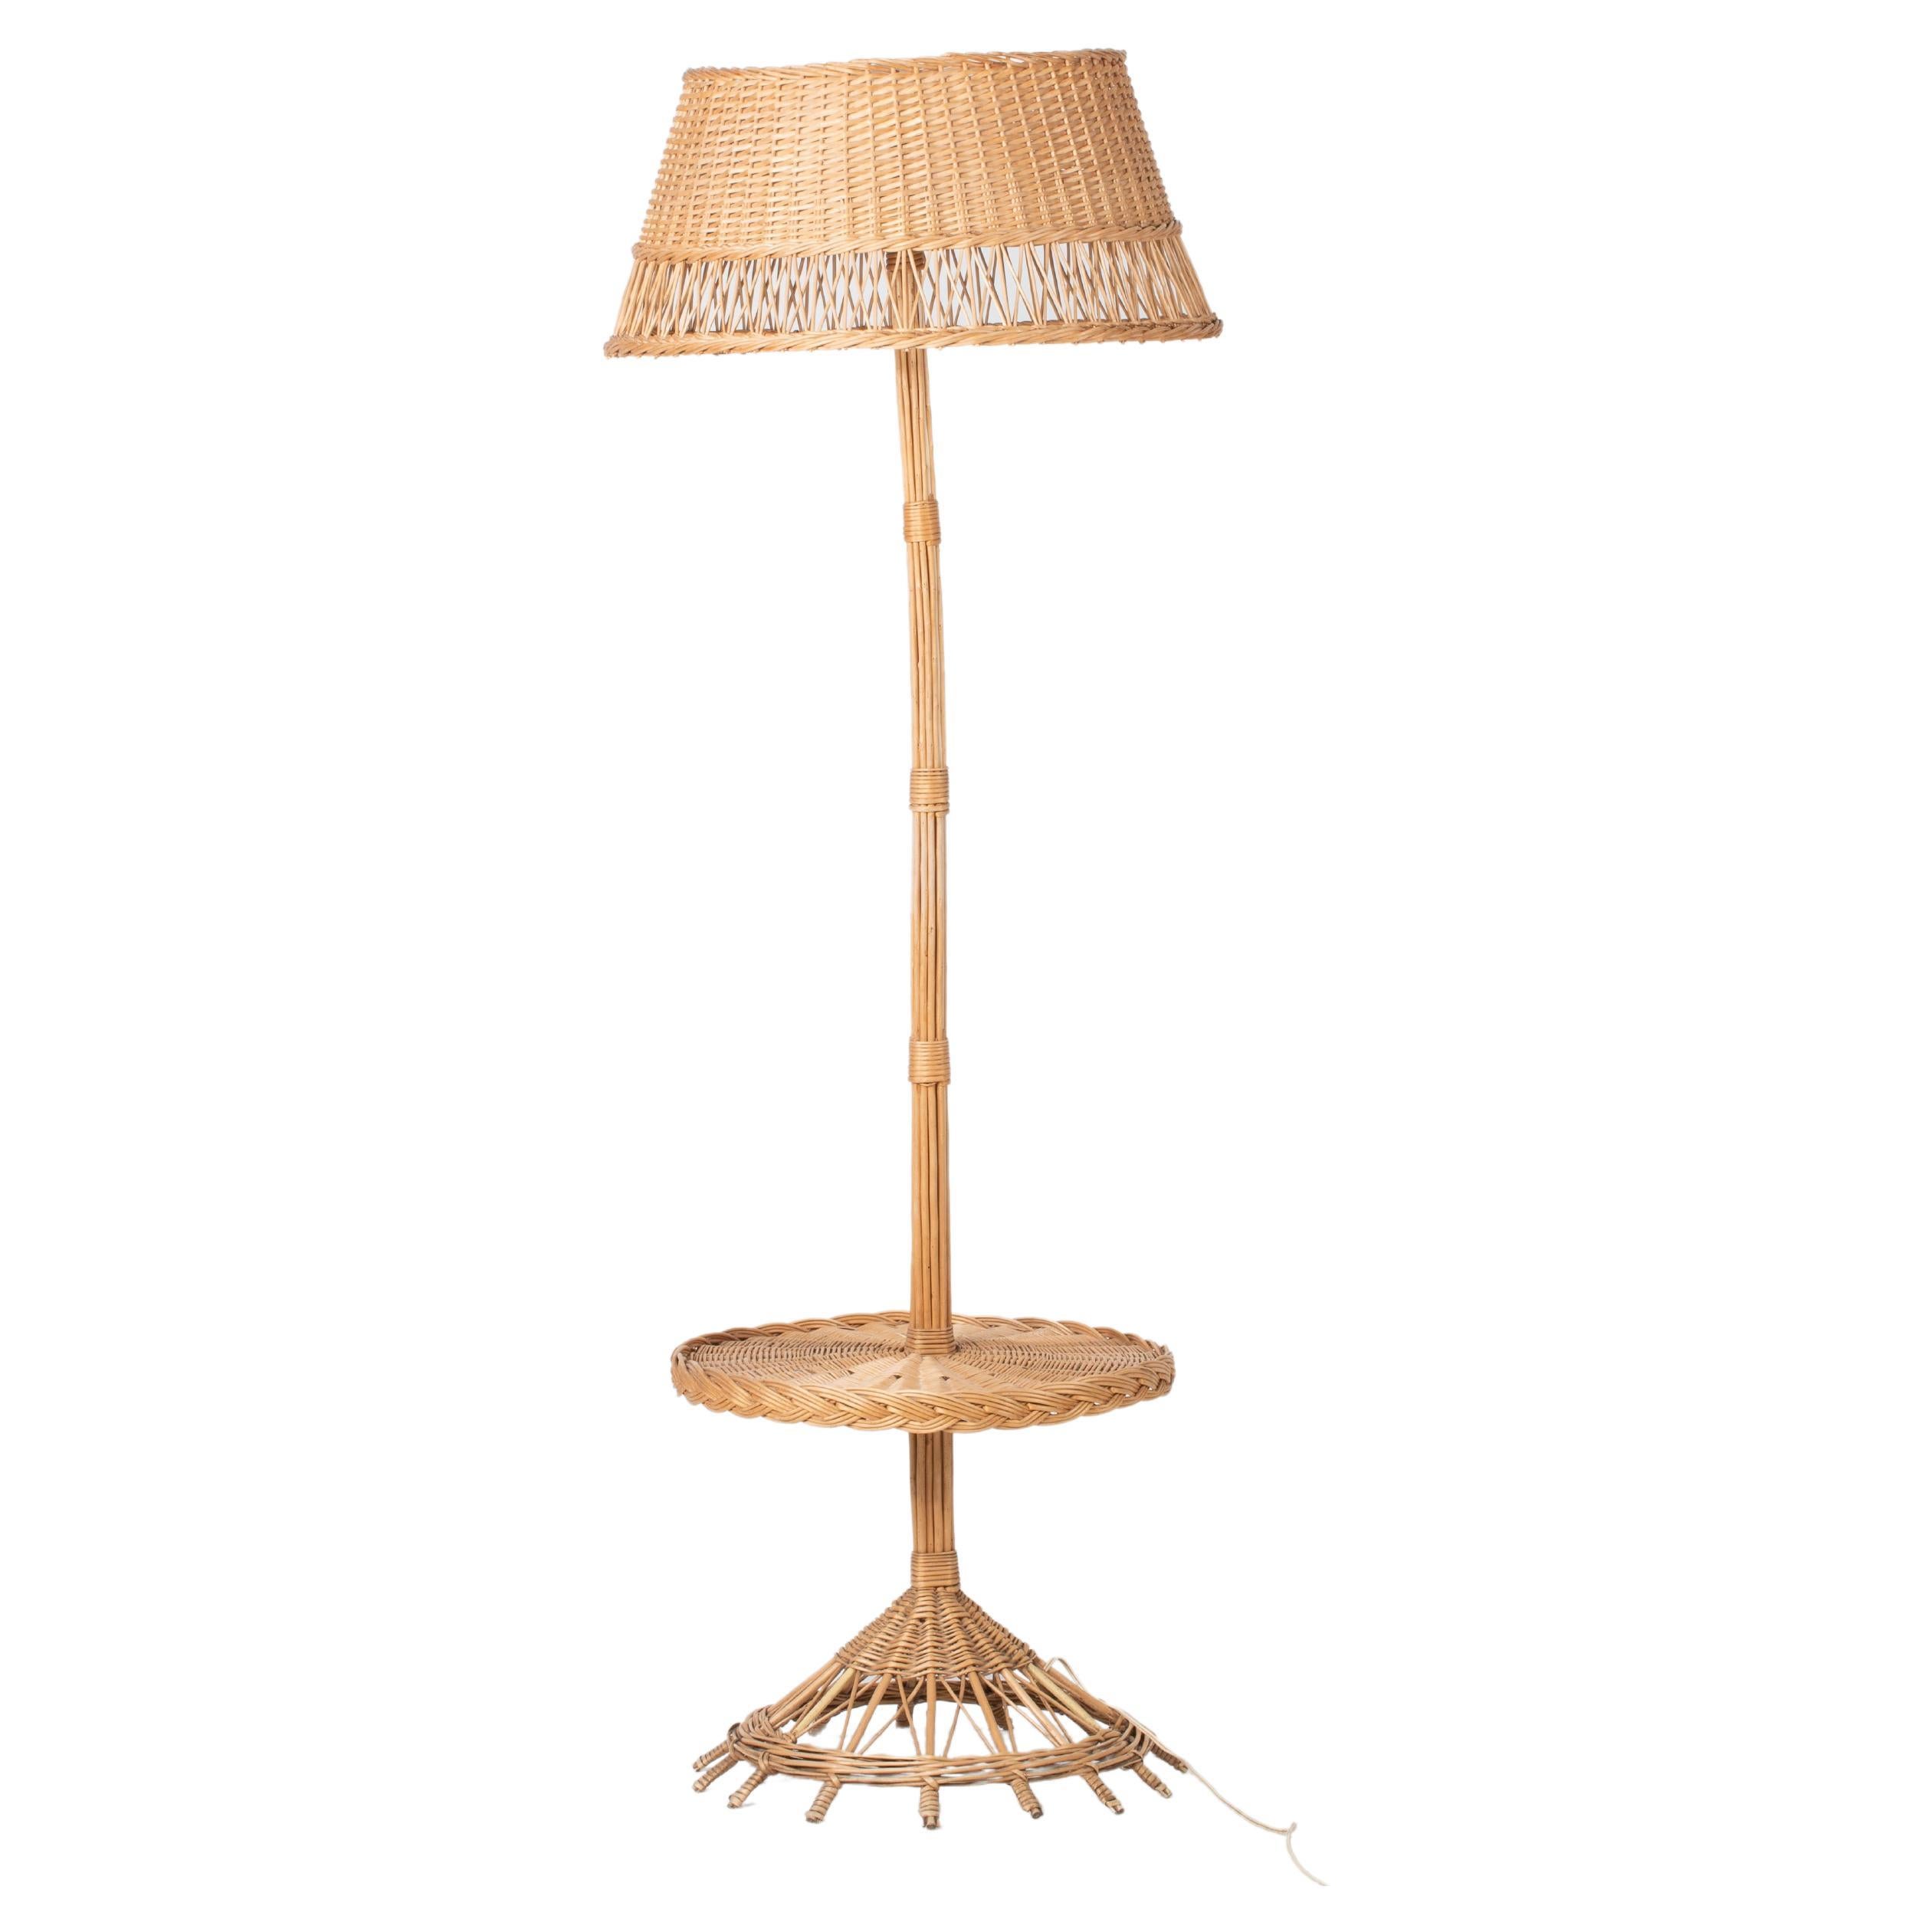 Mid-Century Rattan Floor Lamp, French Riviera, Boho, France, 1960 For Sale